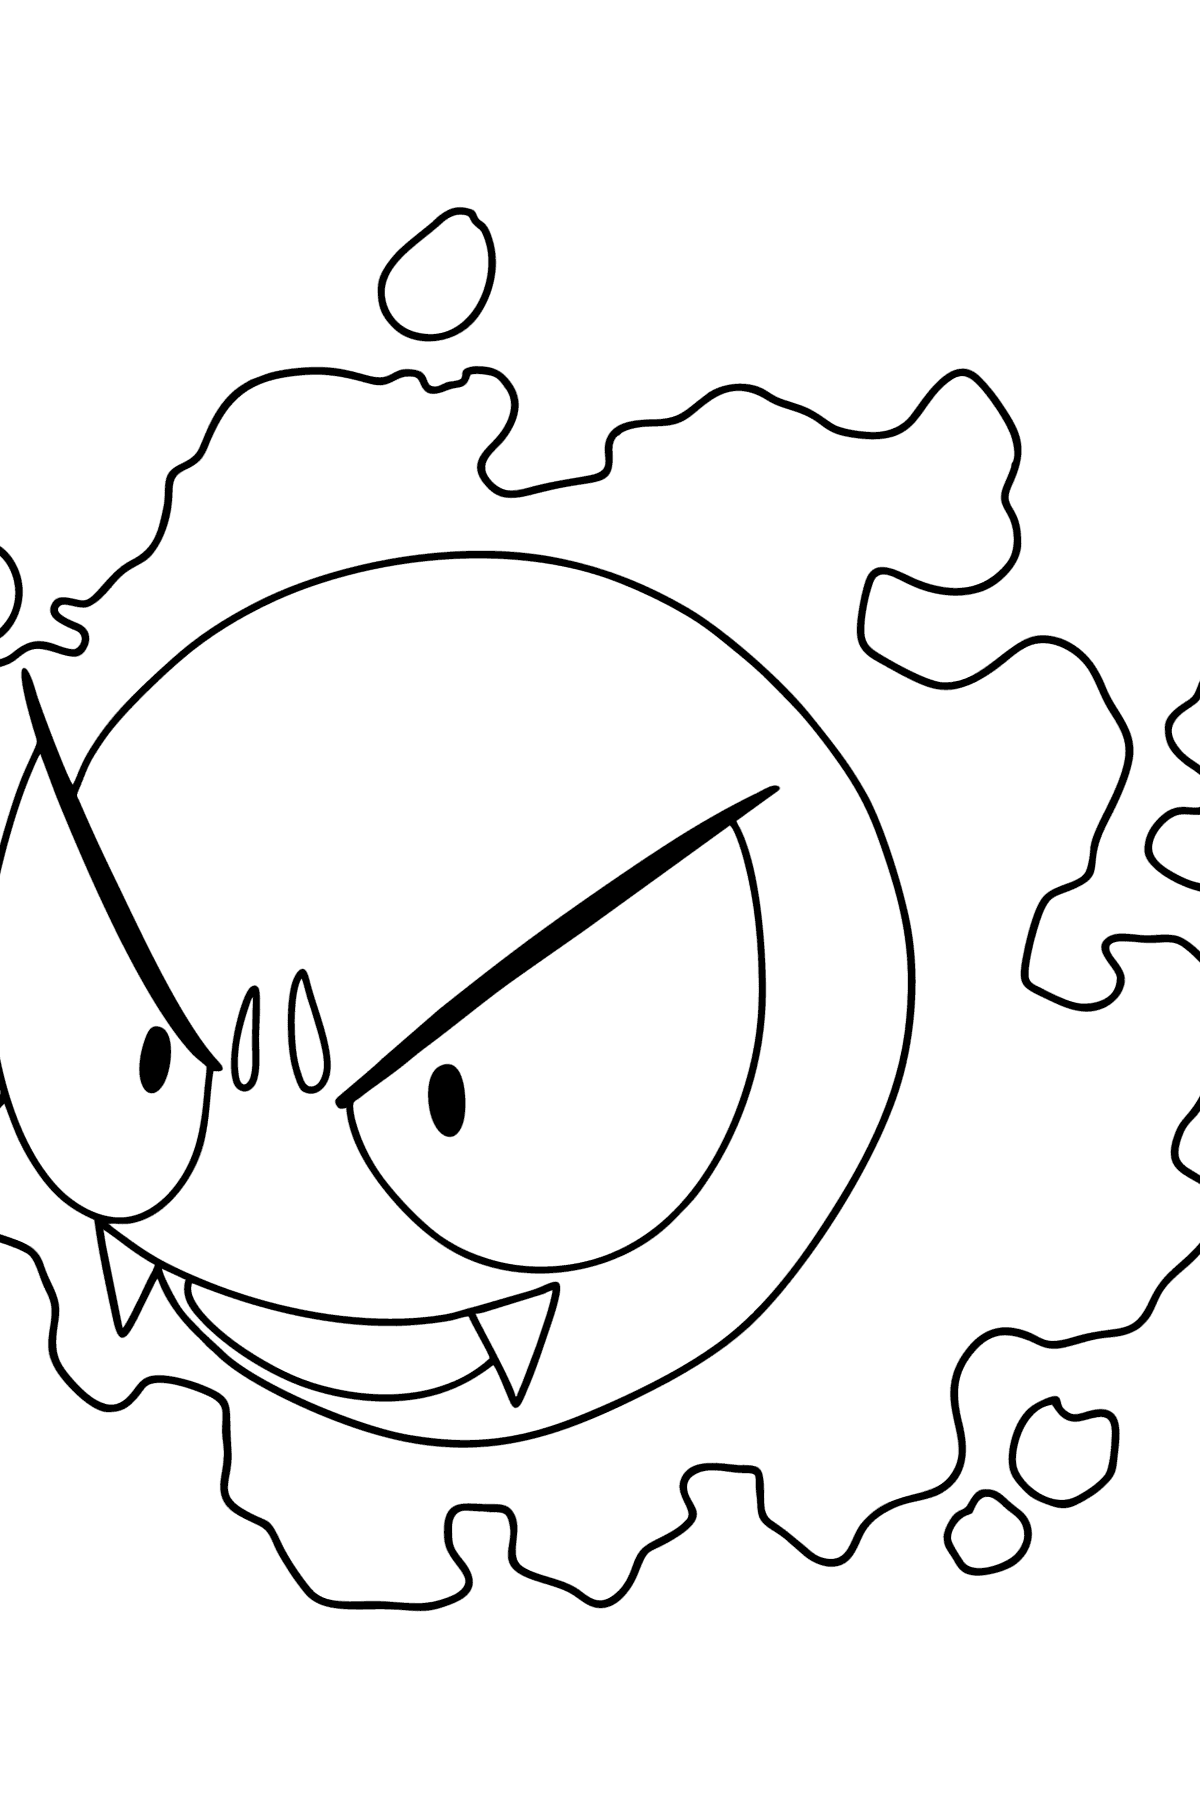 Pokémon Go Gastly coloring page - Coloring Pages for Kids